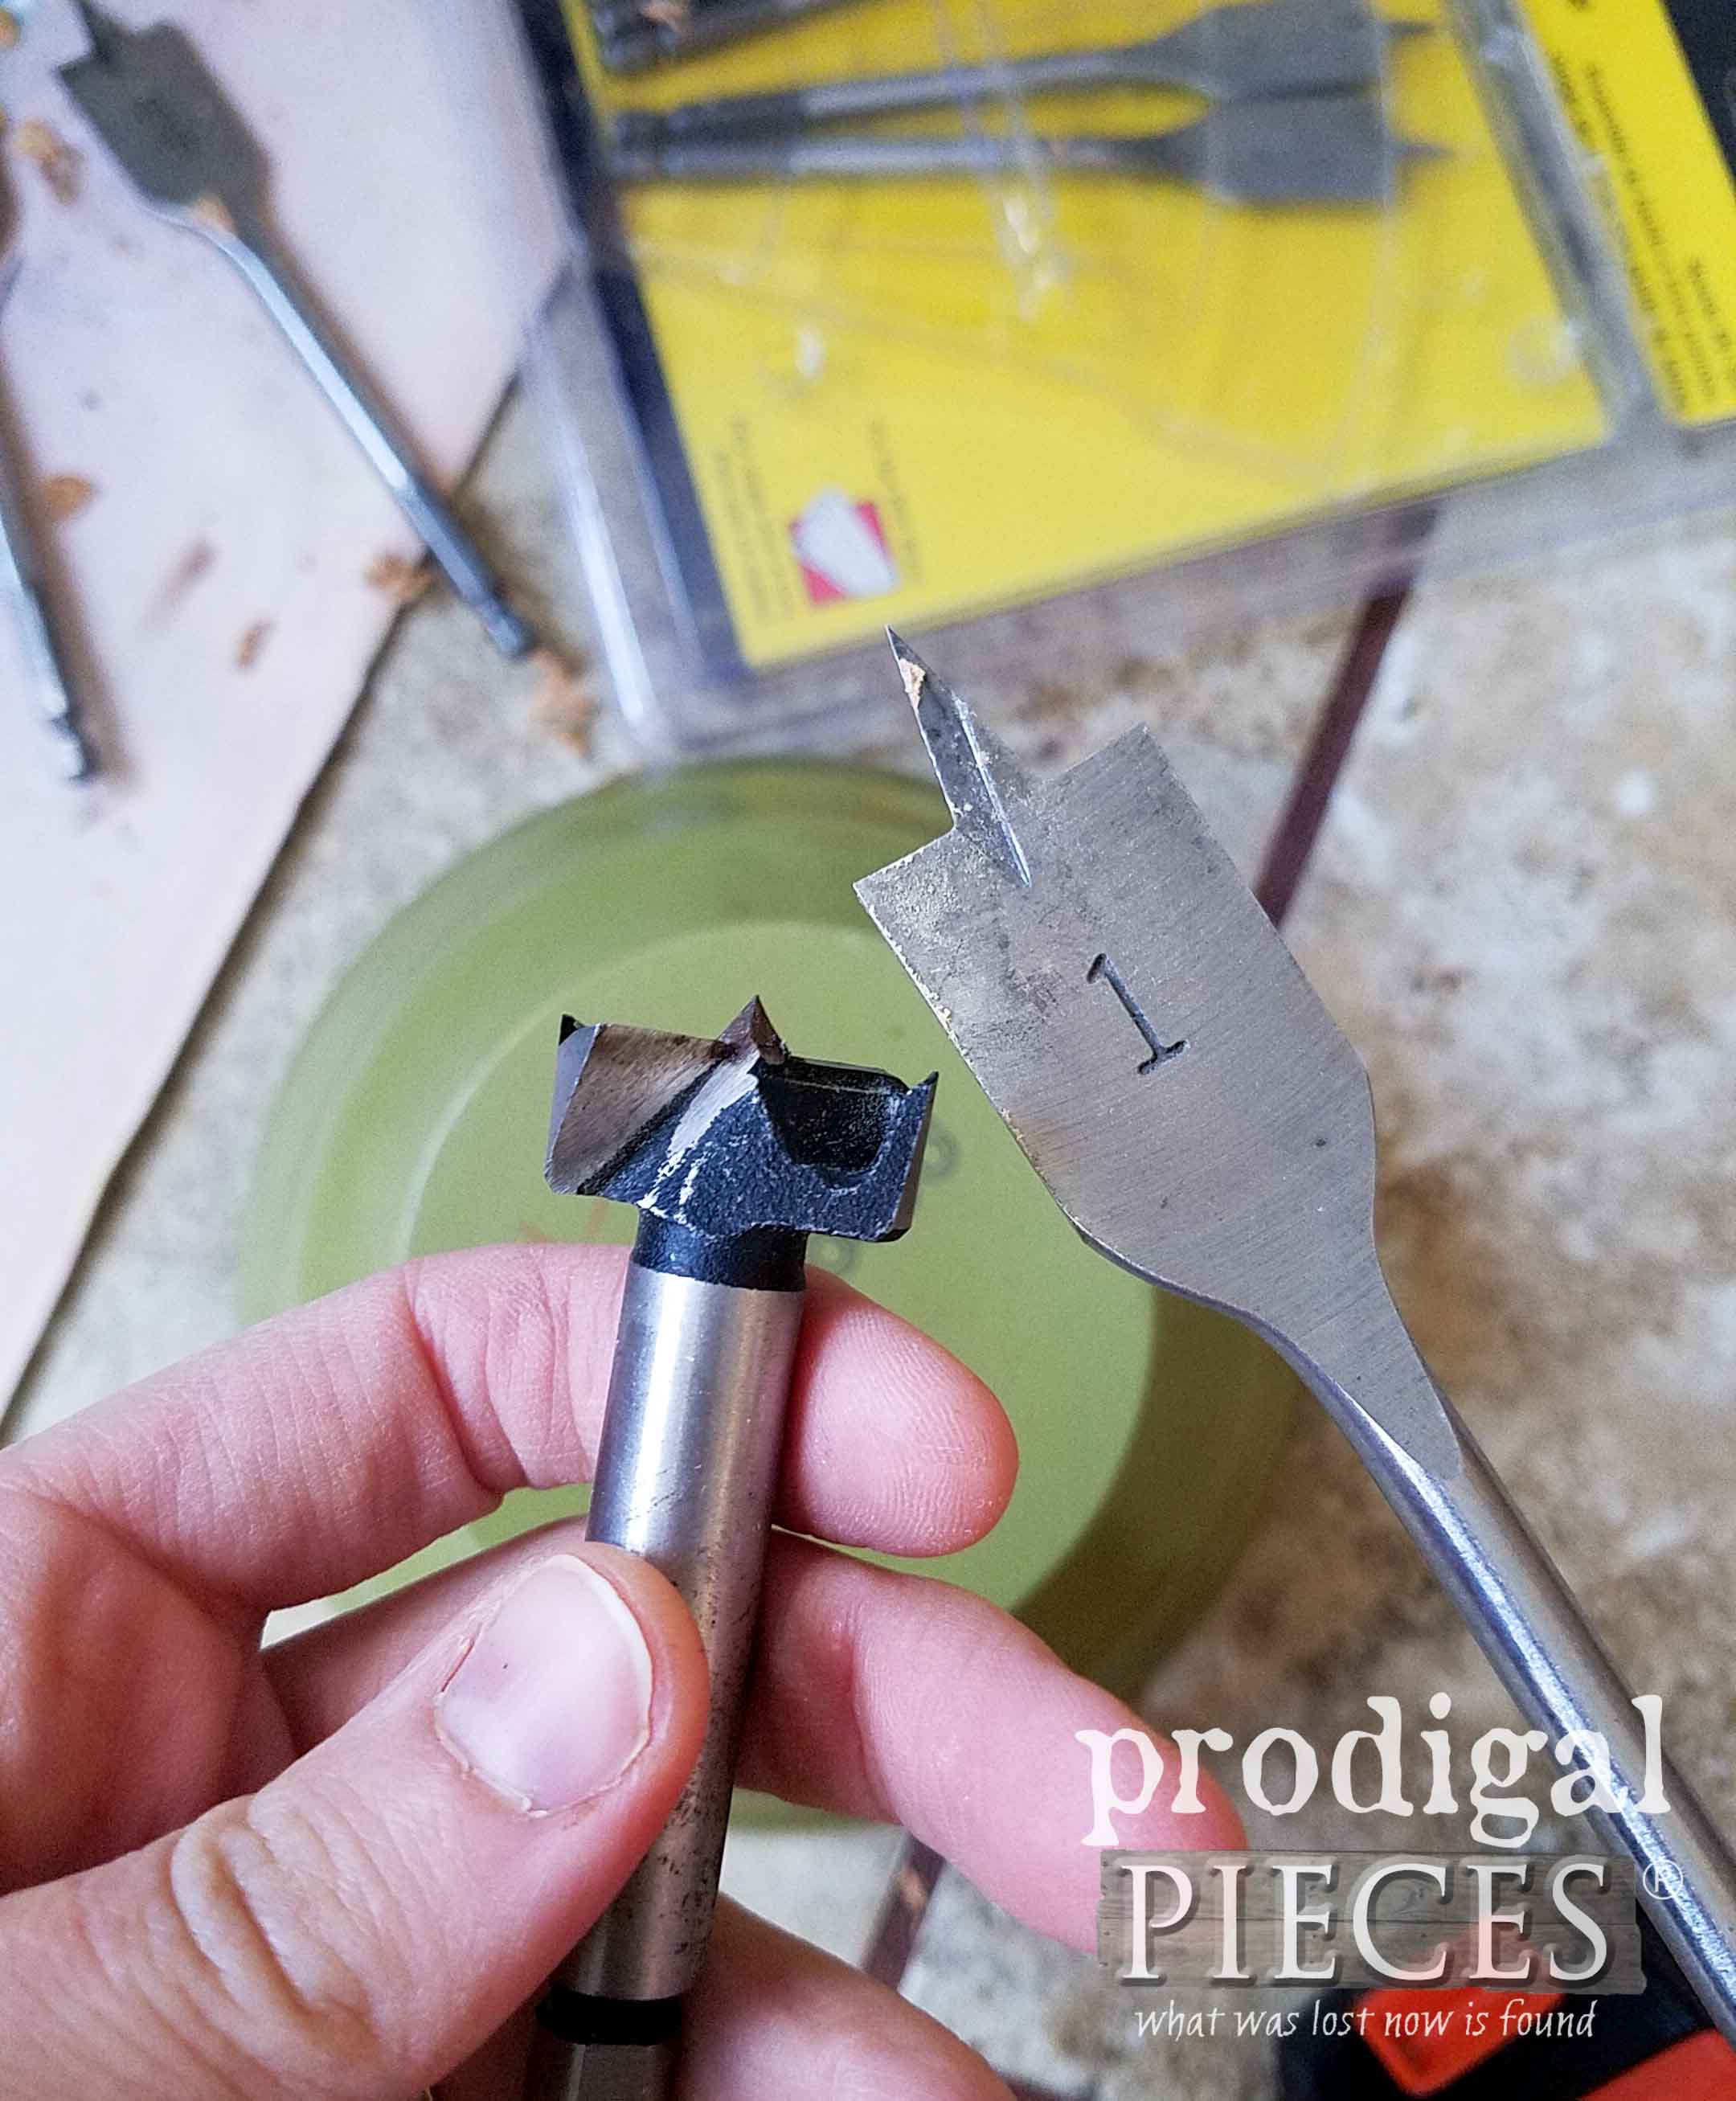 Spade and Forstner Bit for Woodworking | prodigalpieces.com